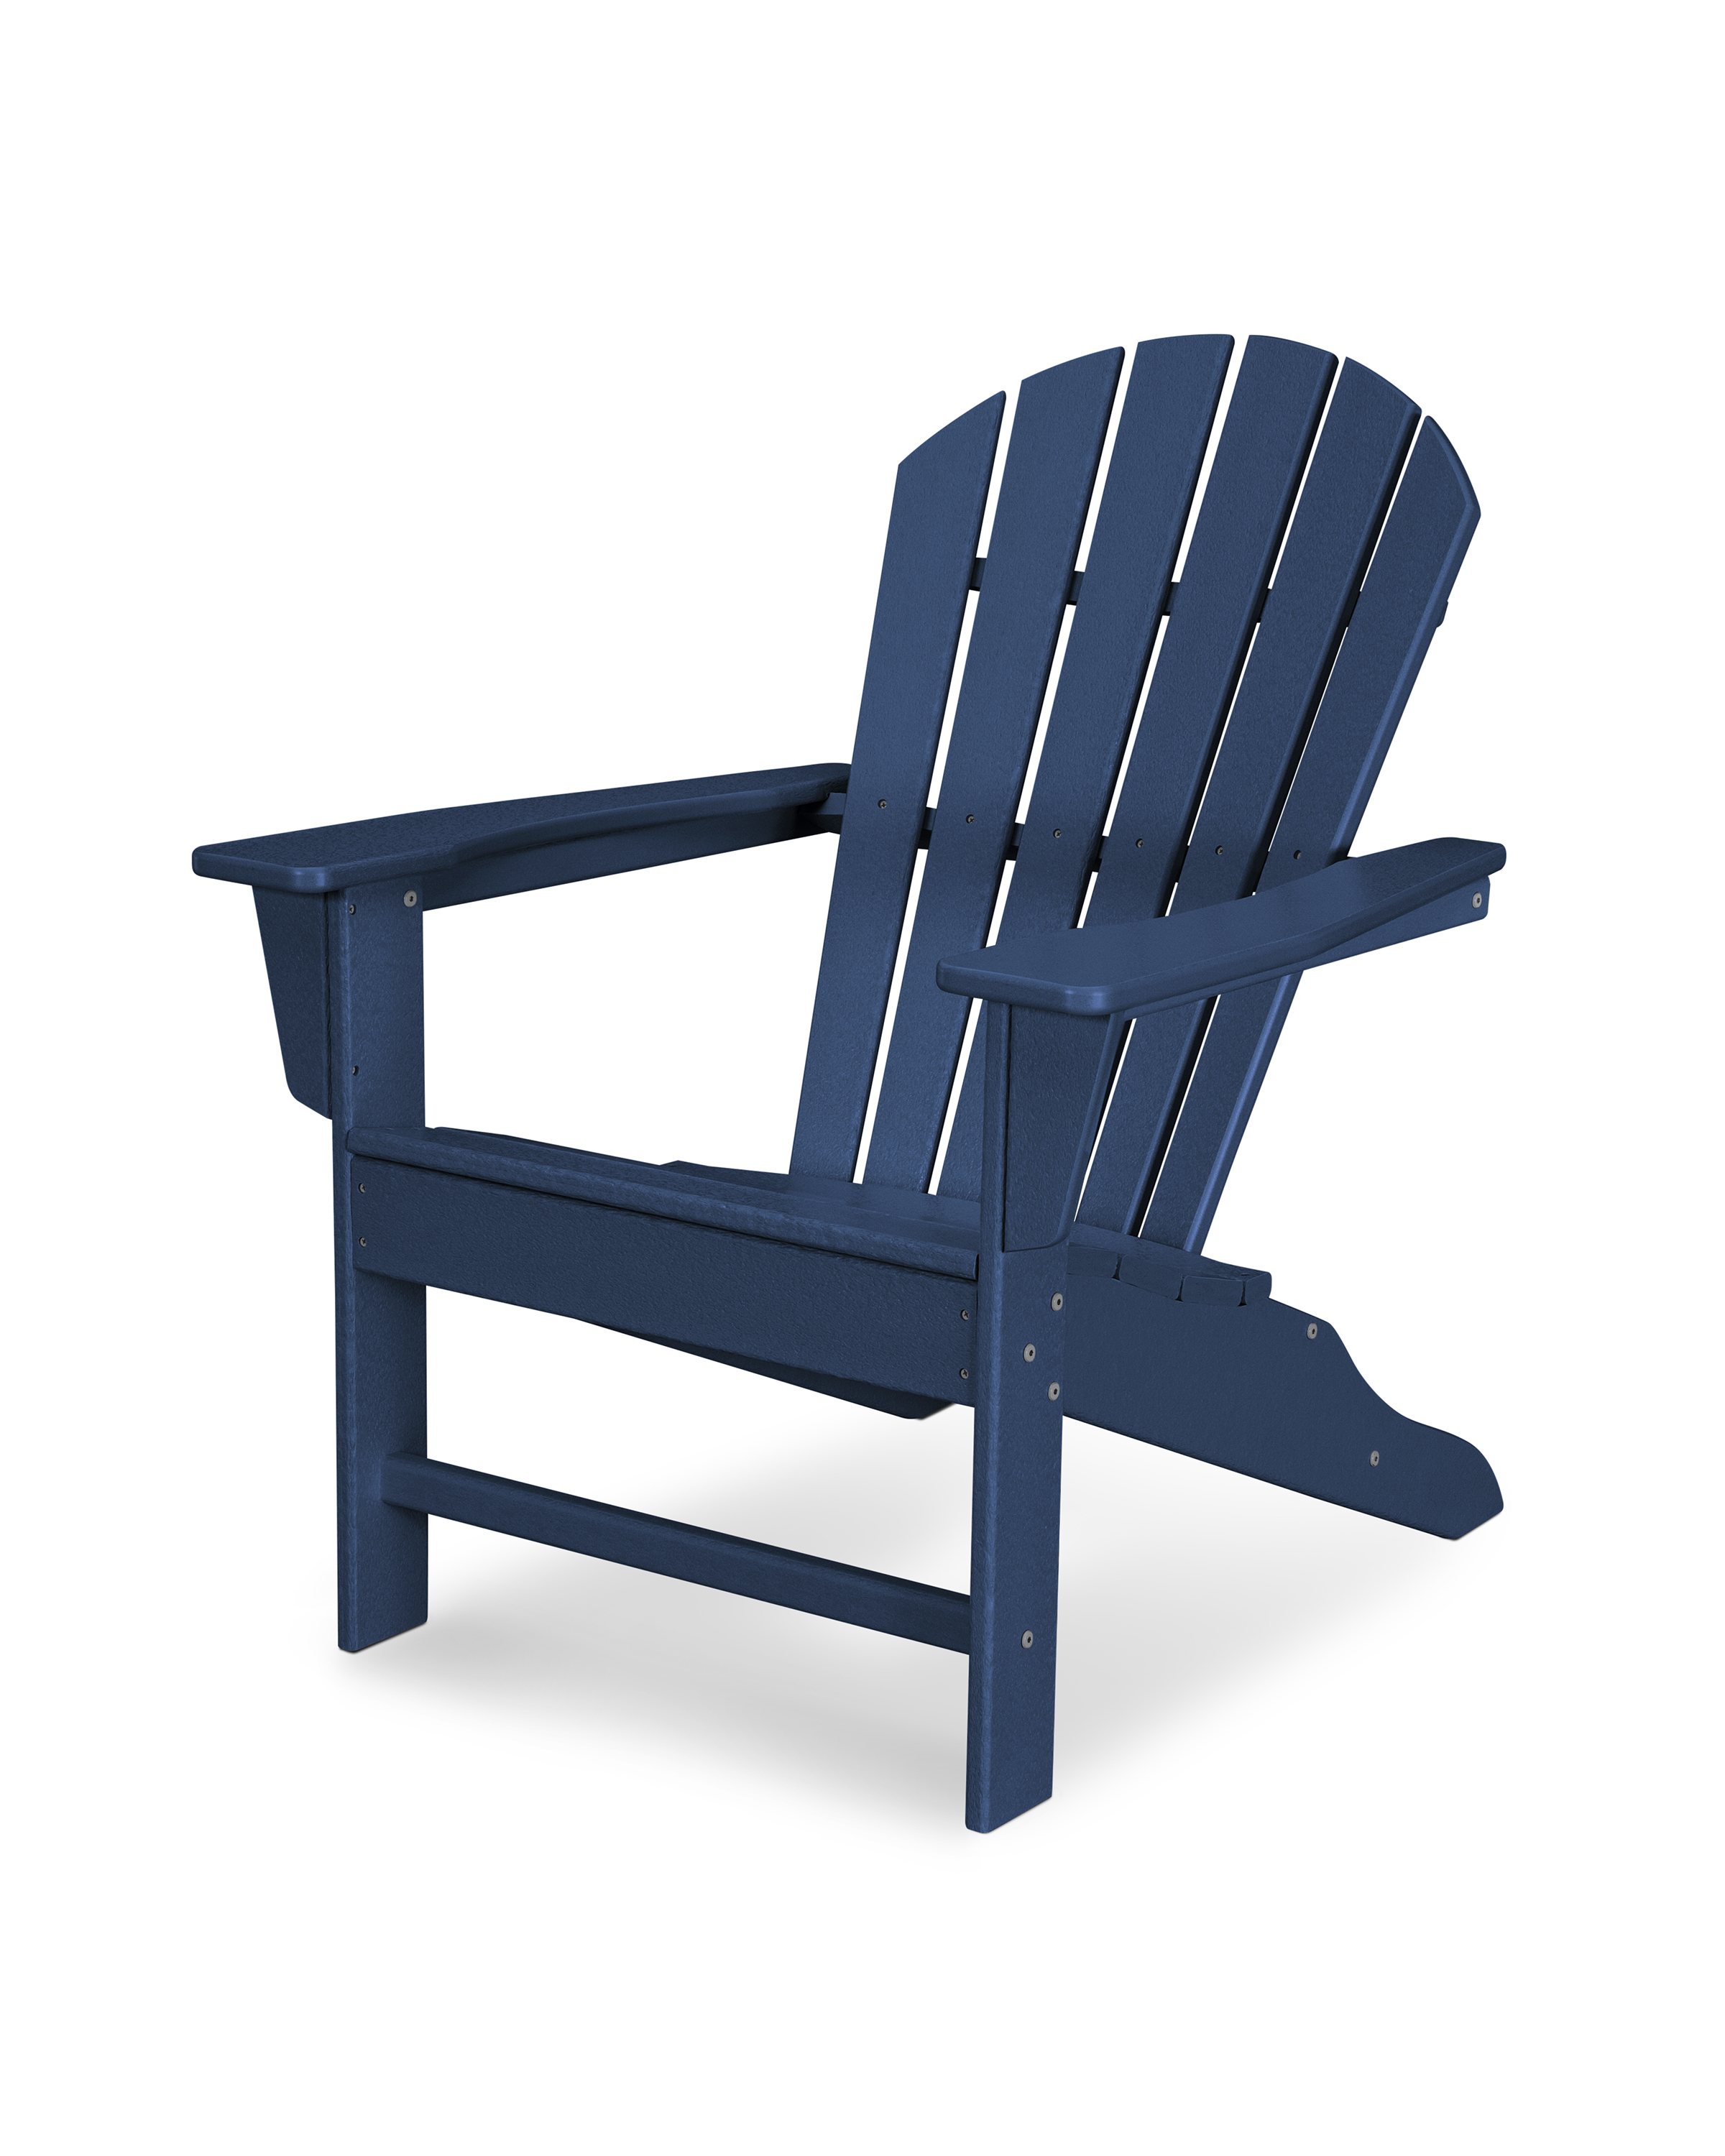 south beach adirondack in navy product image